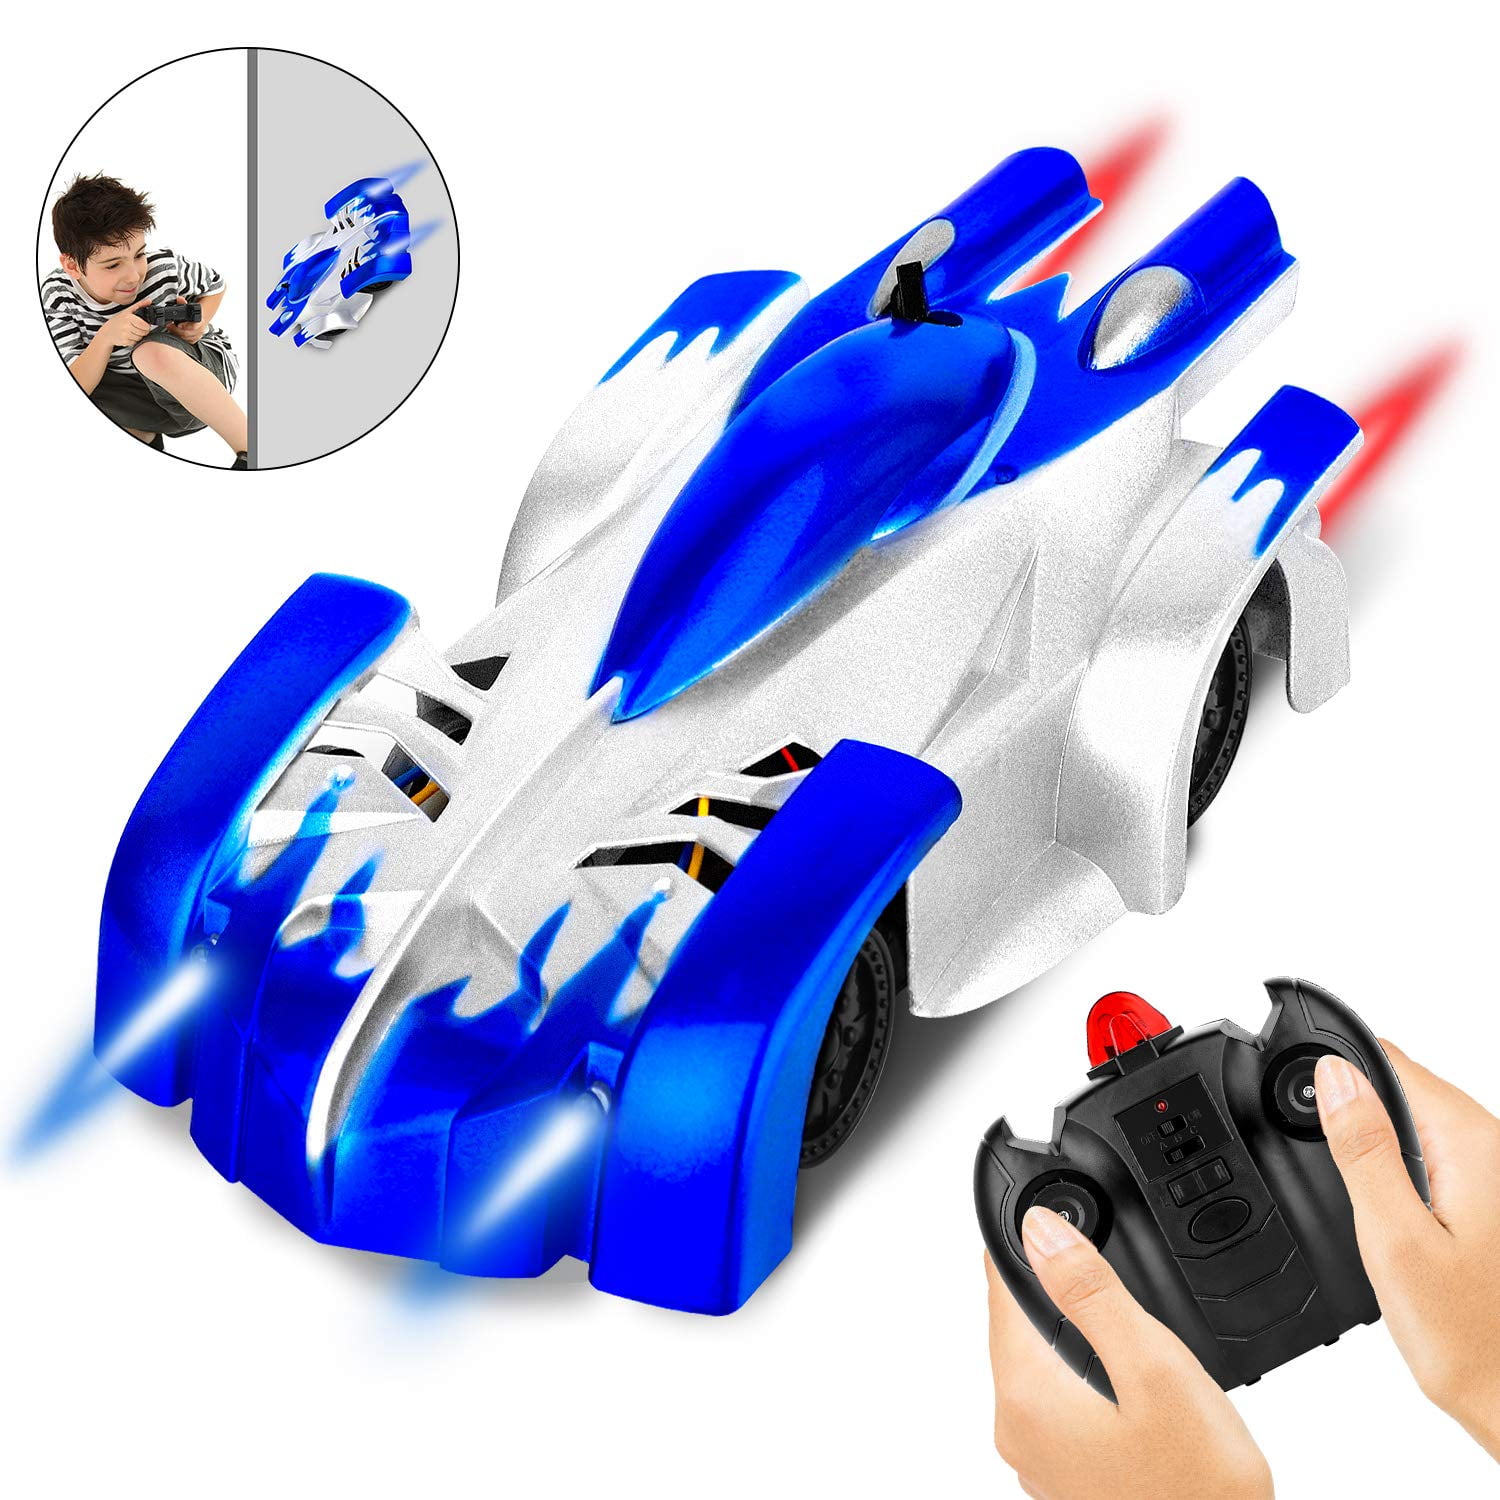 SOWOW Rechargeable Wall Climbing Cars 360°Rotating USB Race Toy Cars with LED Light Wall Stunt Climber Racing Car for Kid Best Gifts for Adult and Kids RC Remote Control Car